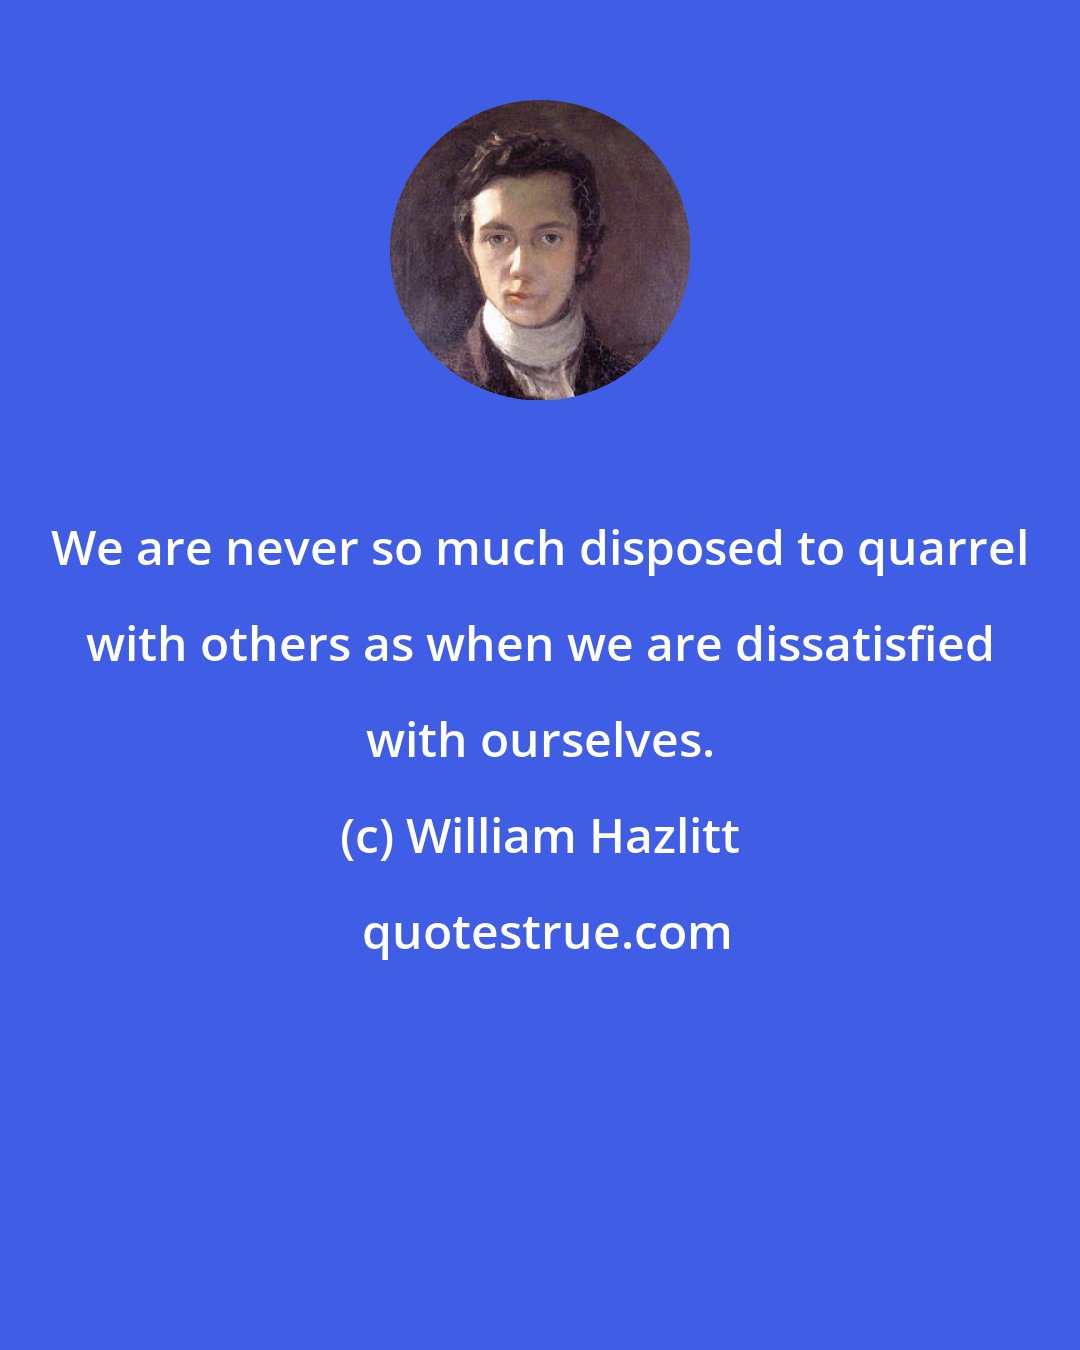 William Hazlitt: We are never so much disposed to quarrel with others as when we are dissatisfied with ourselves.